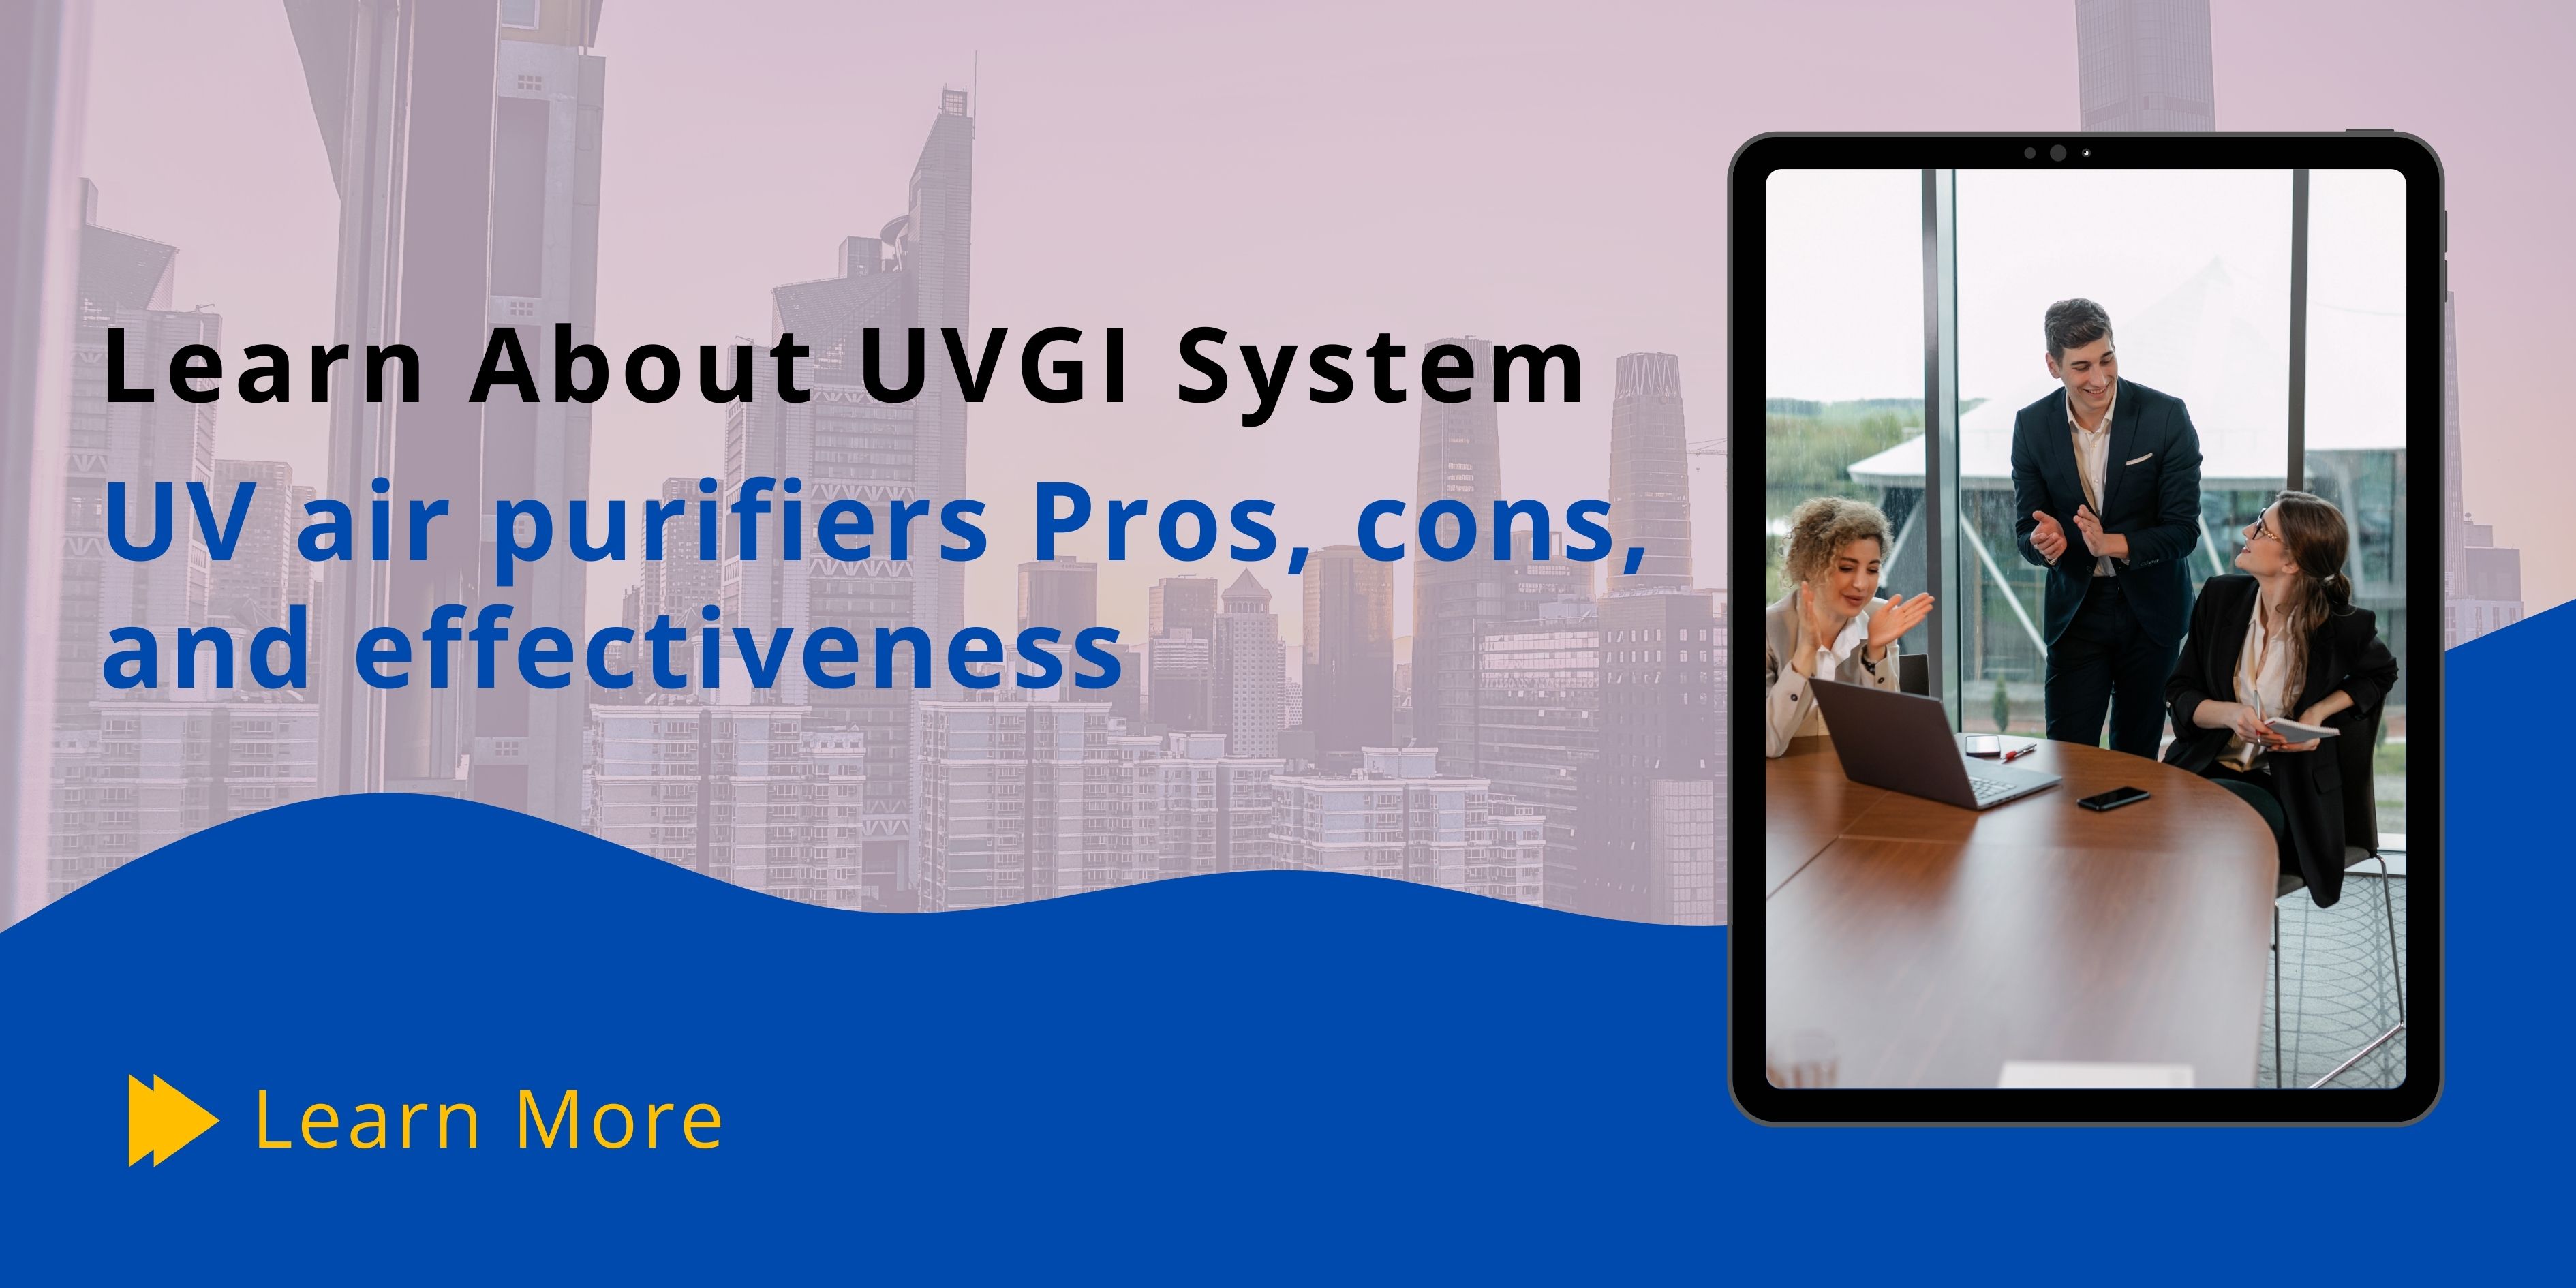 UV air purifiers Pros, cons, and effectiveness | UVGI System Benefits